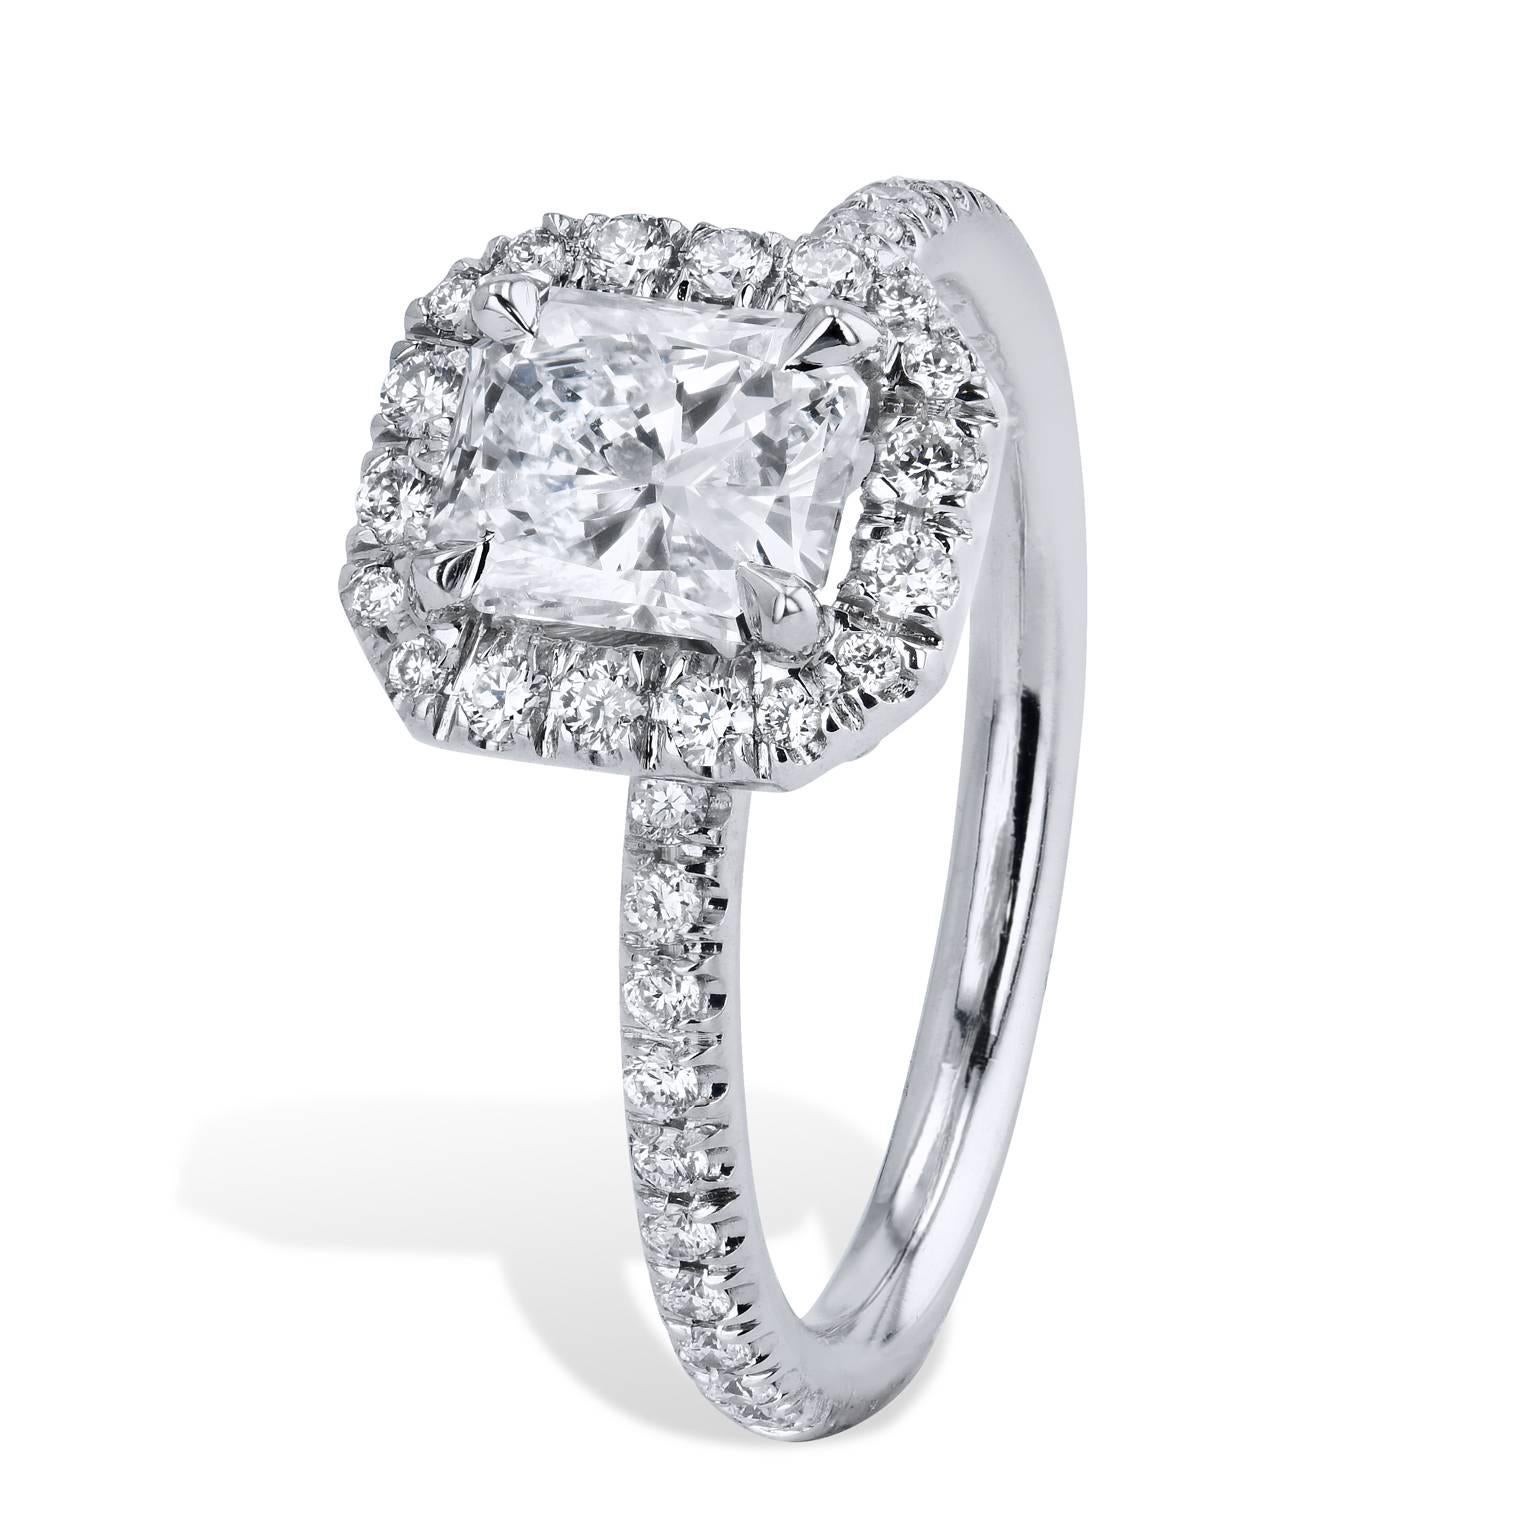 A platinum engagement ring that peers right into one's soul. A 1.05 carat emerald cut diamond prong-set at center (E/I1; GIA# 5181930855) focuses one's gaze, while 0.31 carat of pave set diamond (D/E/F/VS), out pour from center and form a halo.